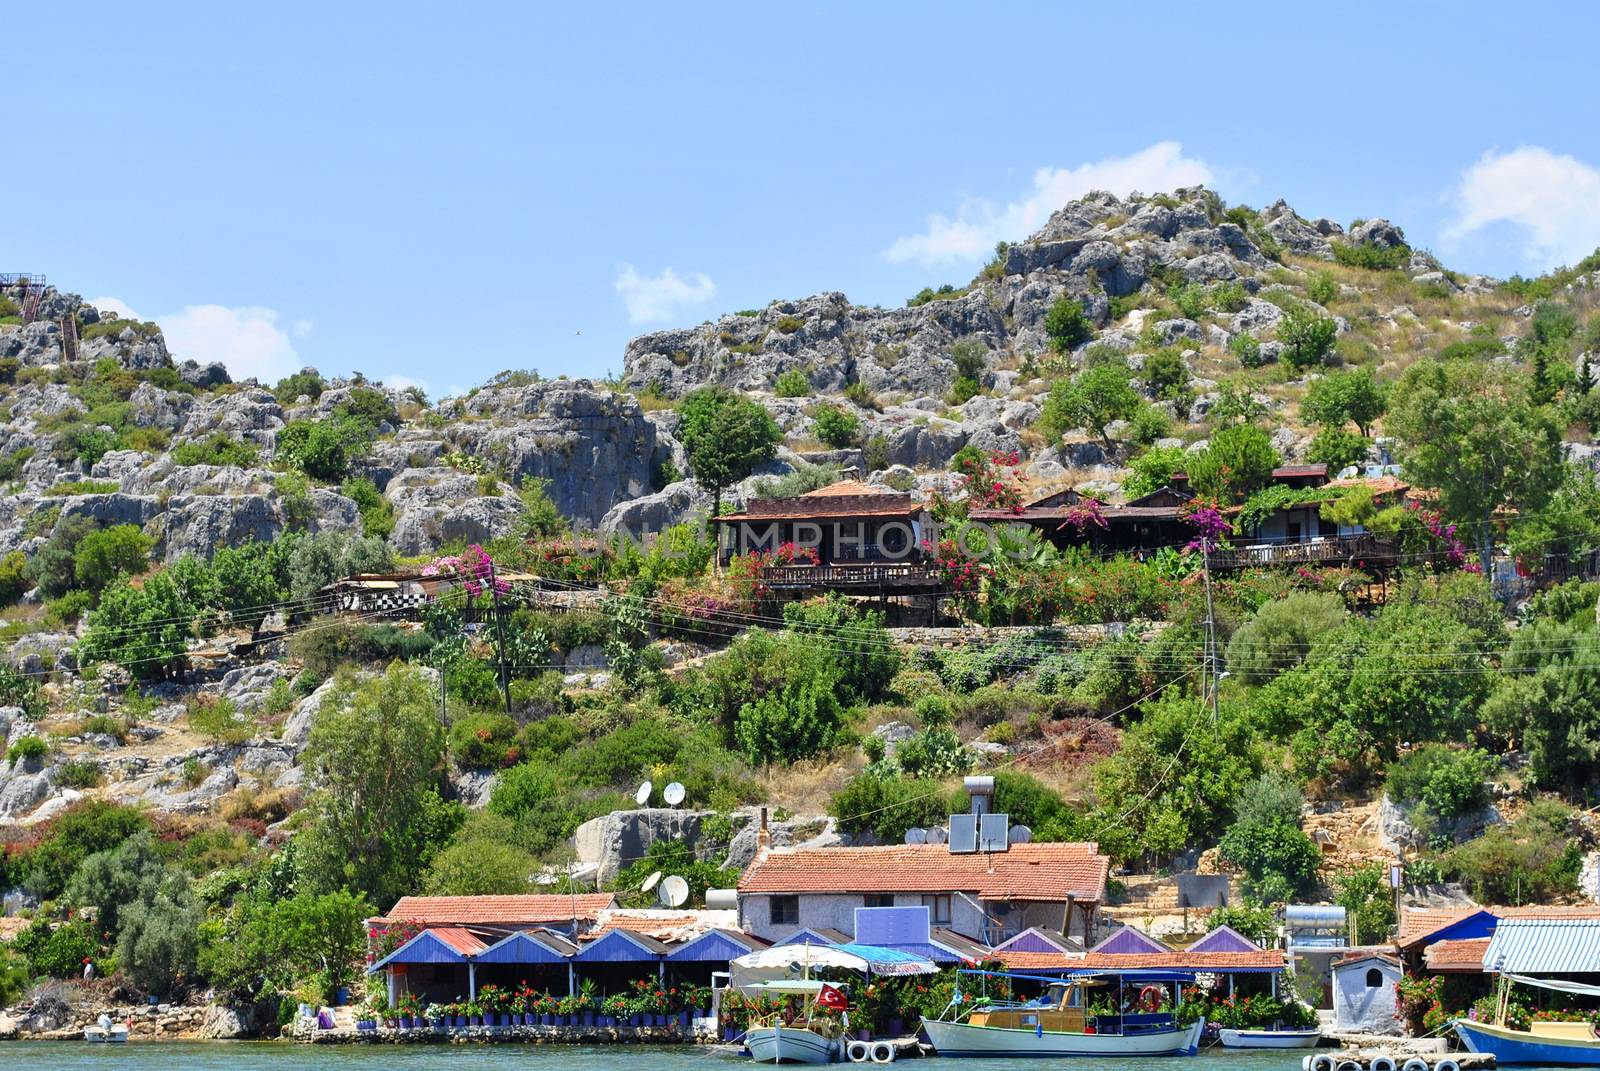 Cafes, hotels and restaurants located on an island in the Turkey by DaVidich